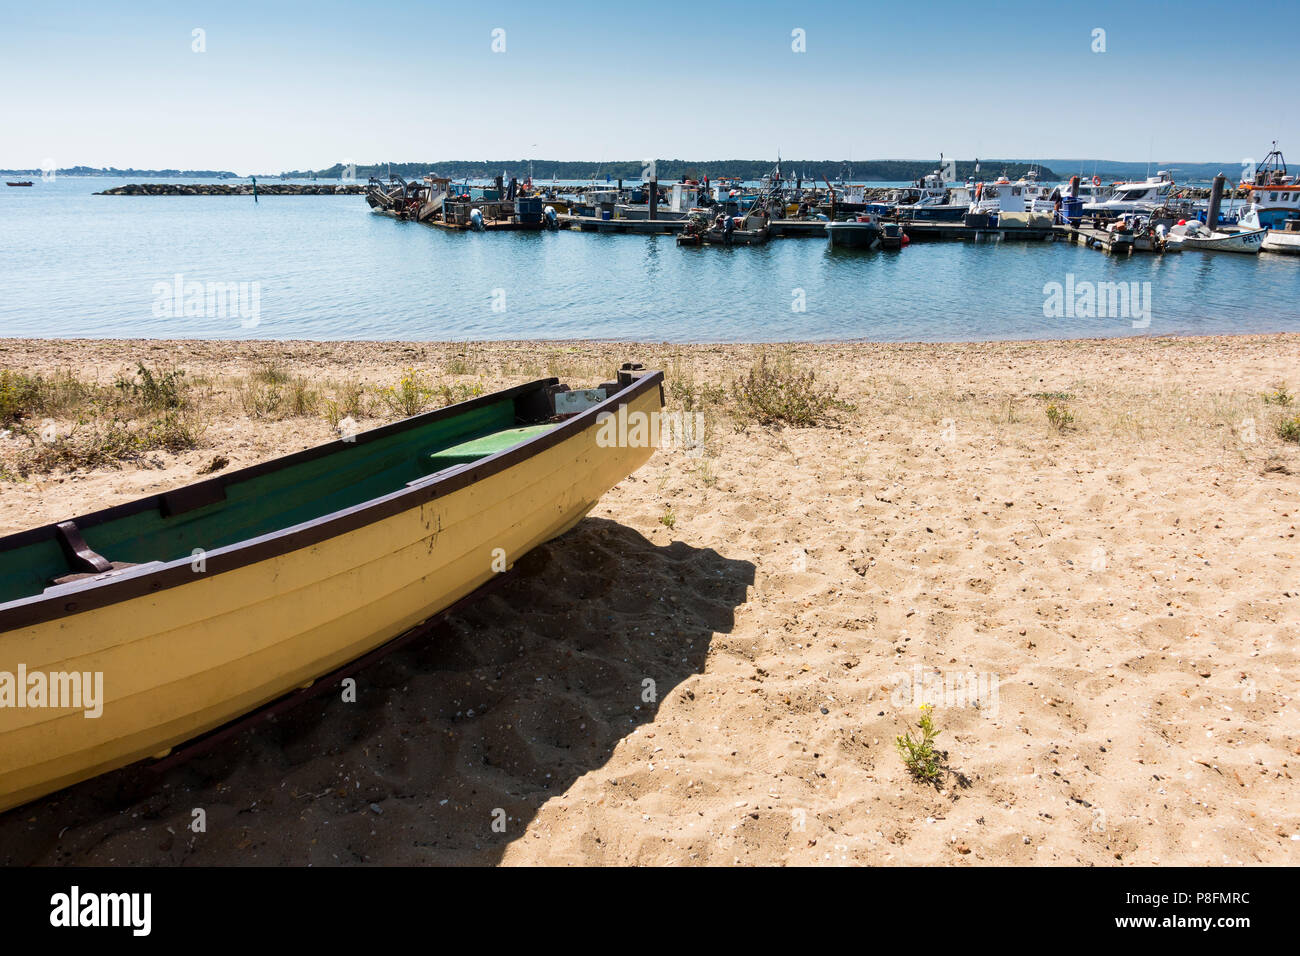 An empty rowning boat on the sand beside Poole Harbour with fishing vessels moored in the background, Poole, Dorset, United Kingdom Stock Photo